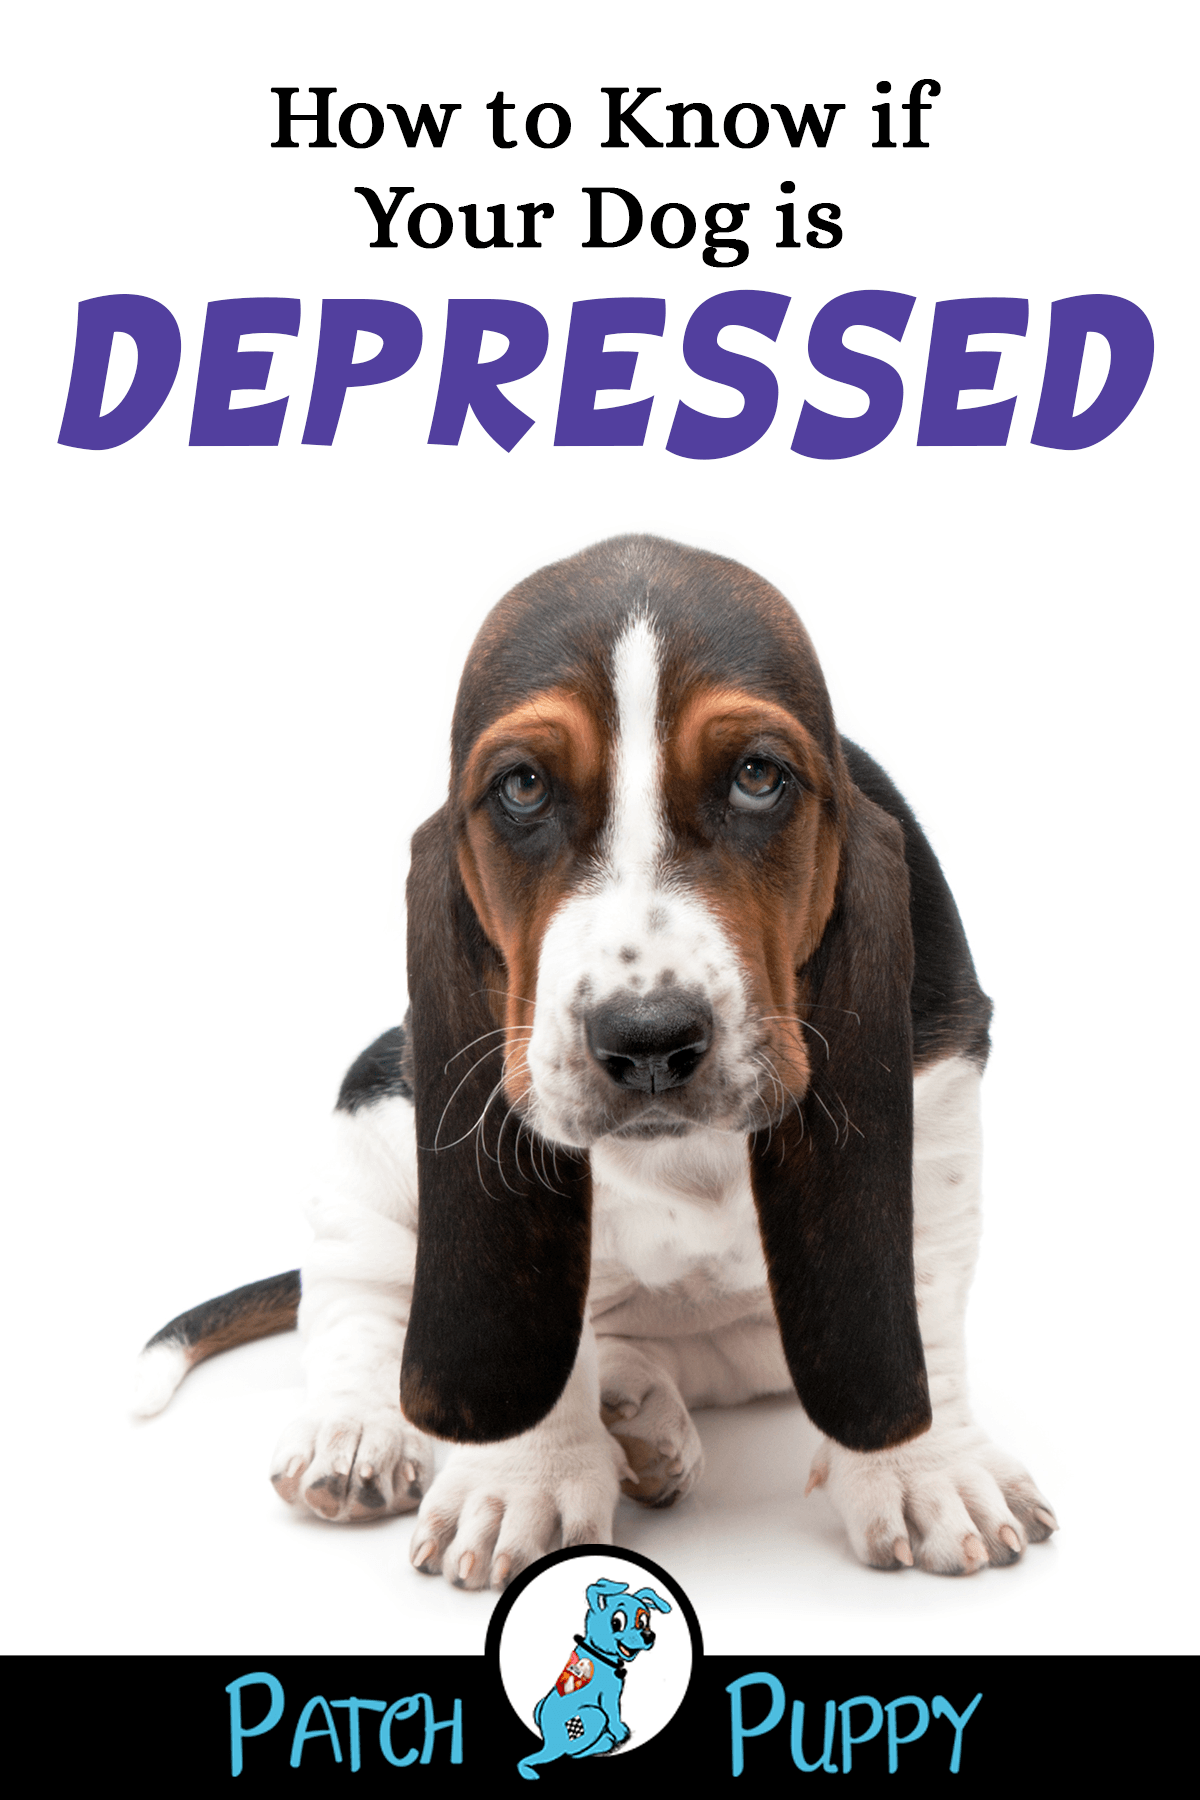 How to Know if Your Dog is Depressed